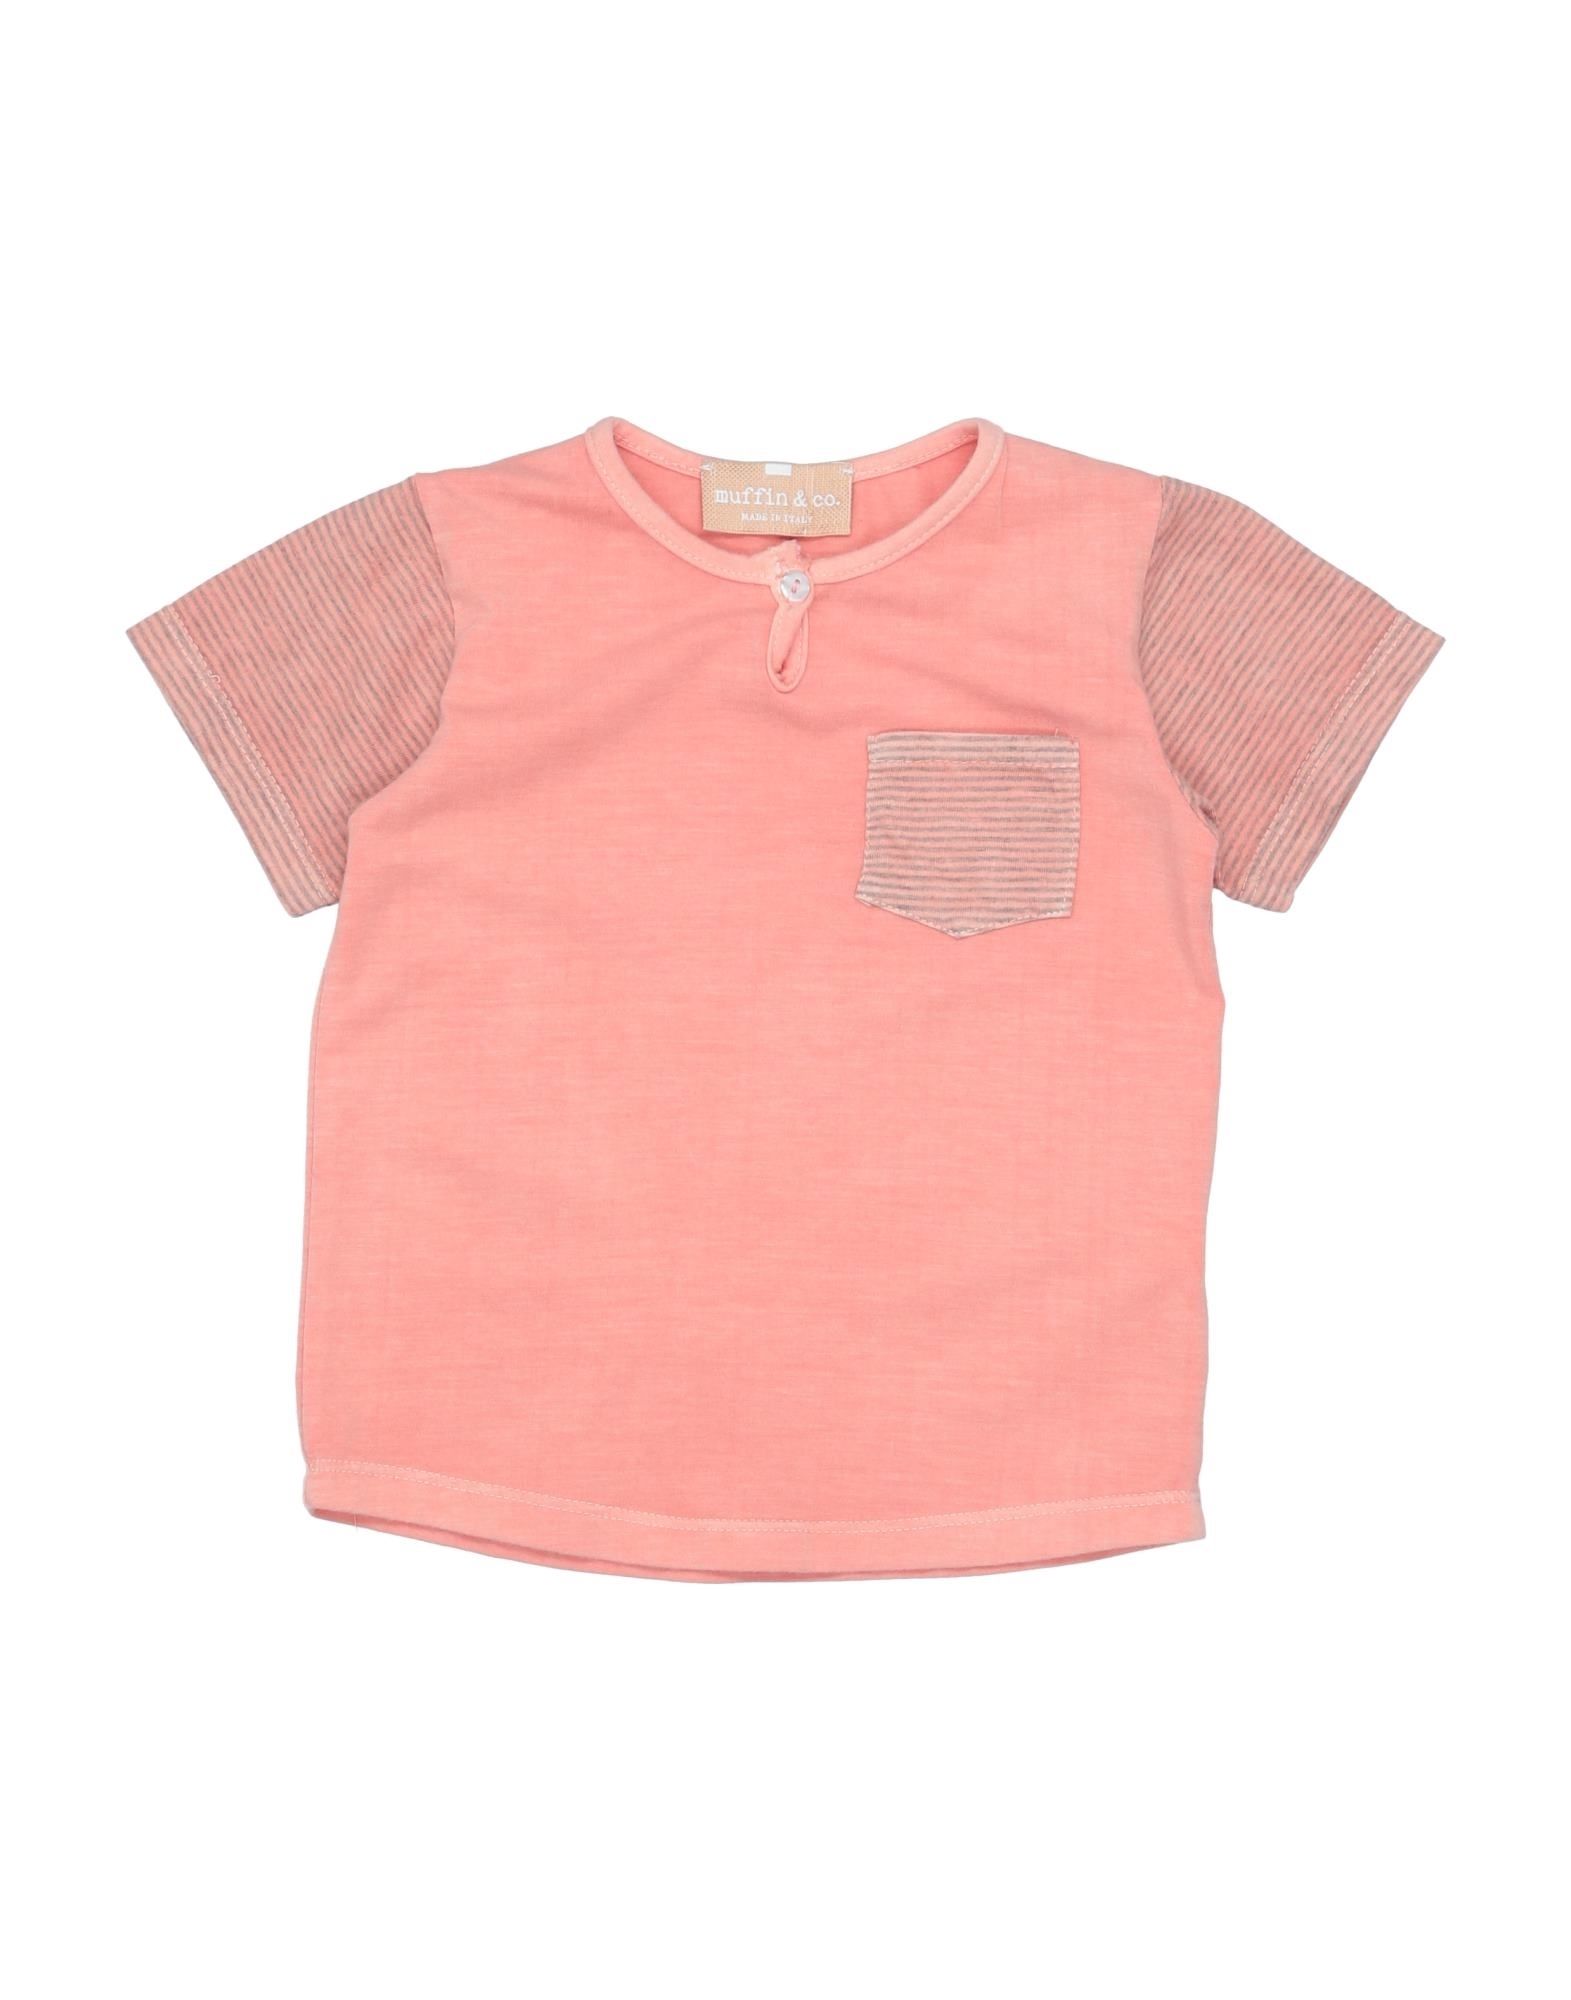 Muffin & Co. Kids' T-shirts In Salmon Pink